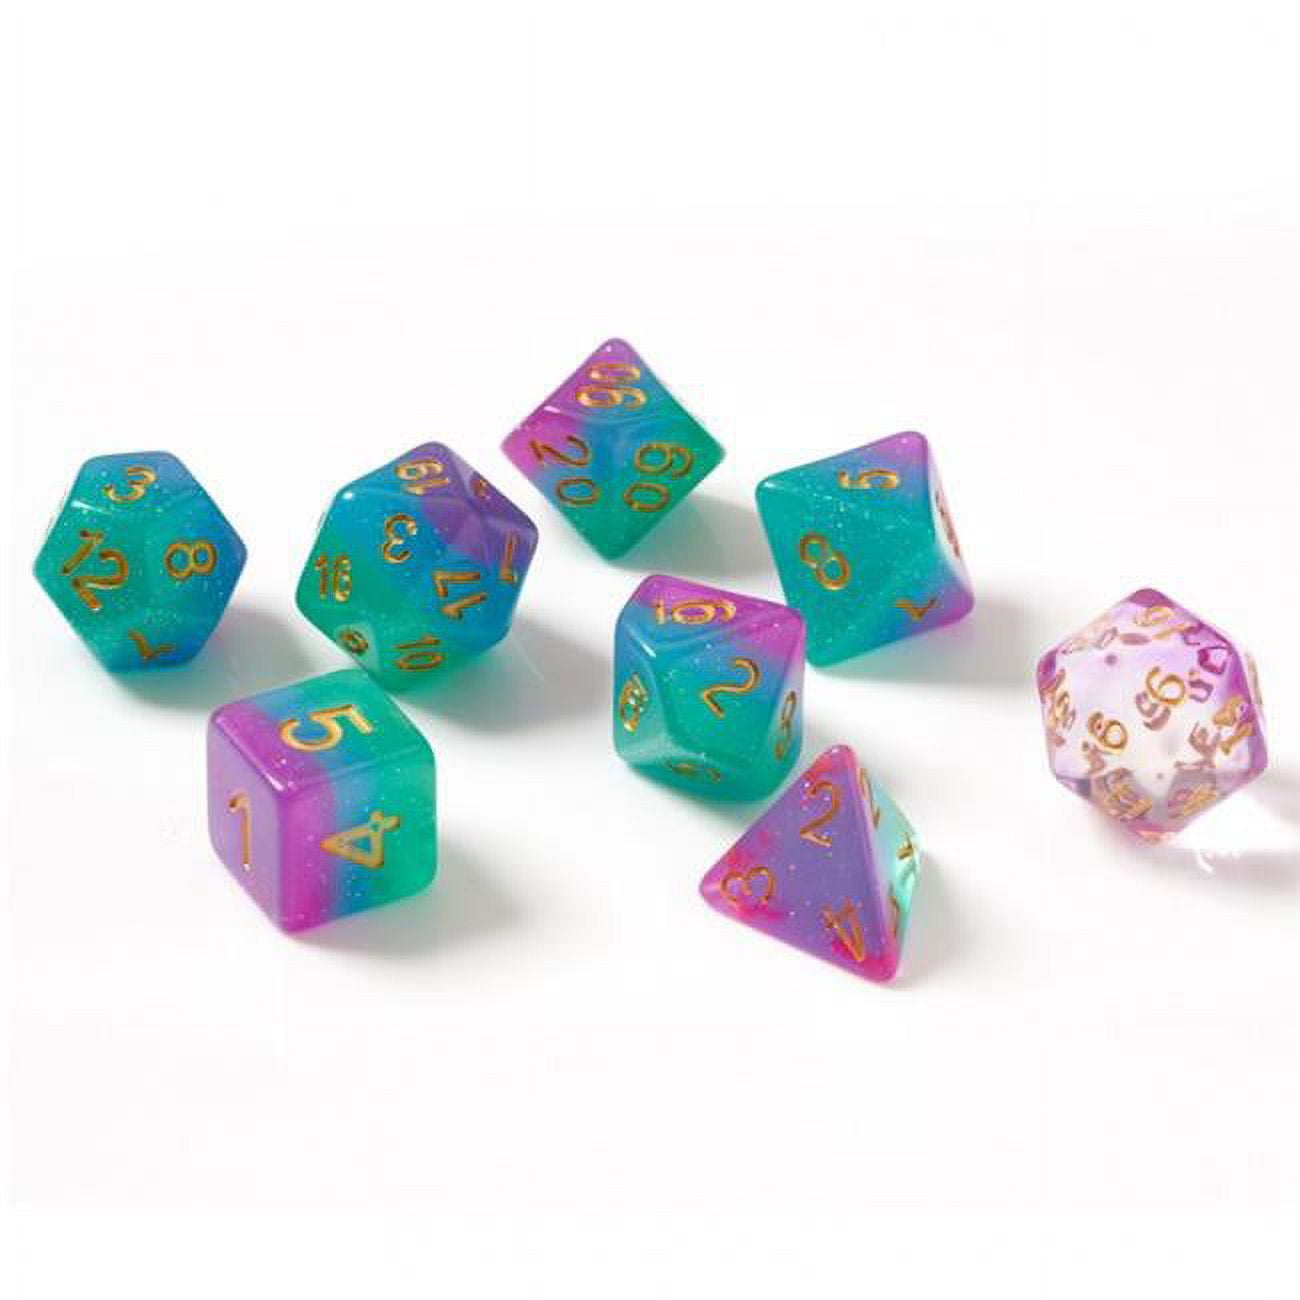 Sdz000301 Northern Lights Dice With Gold Numbers - Set Of 7